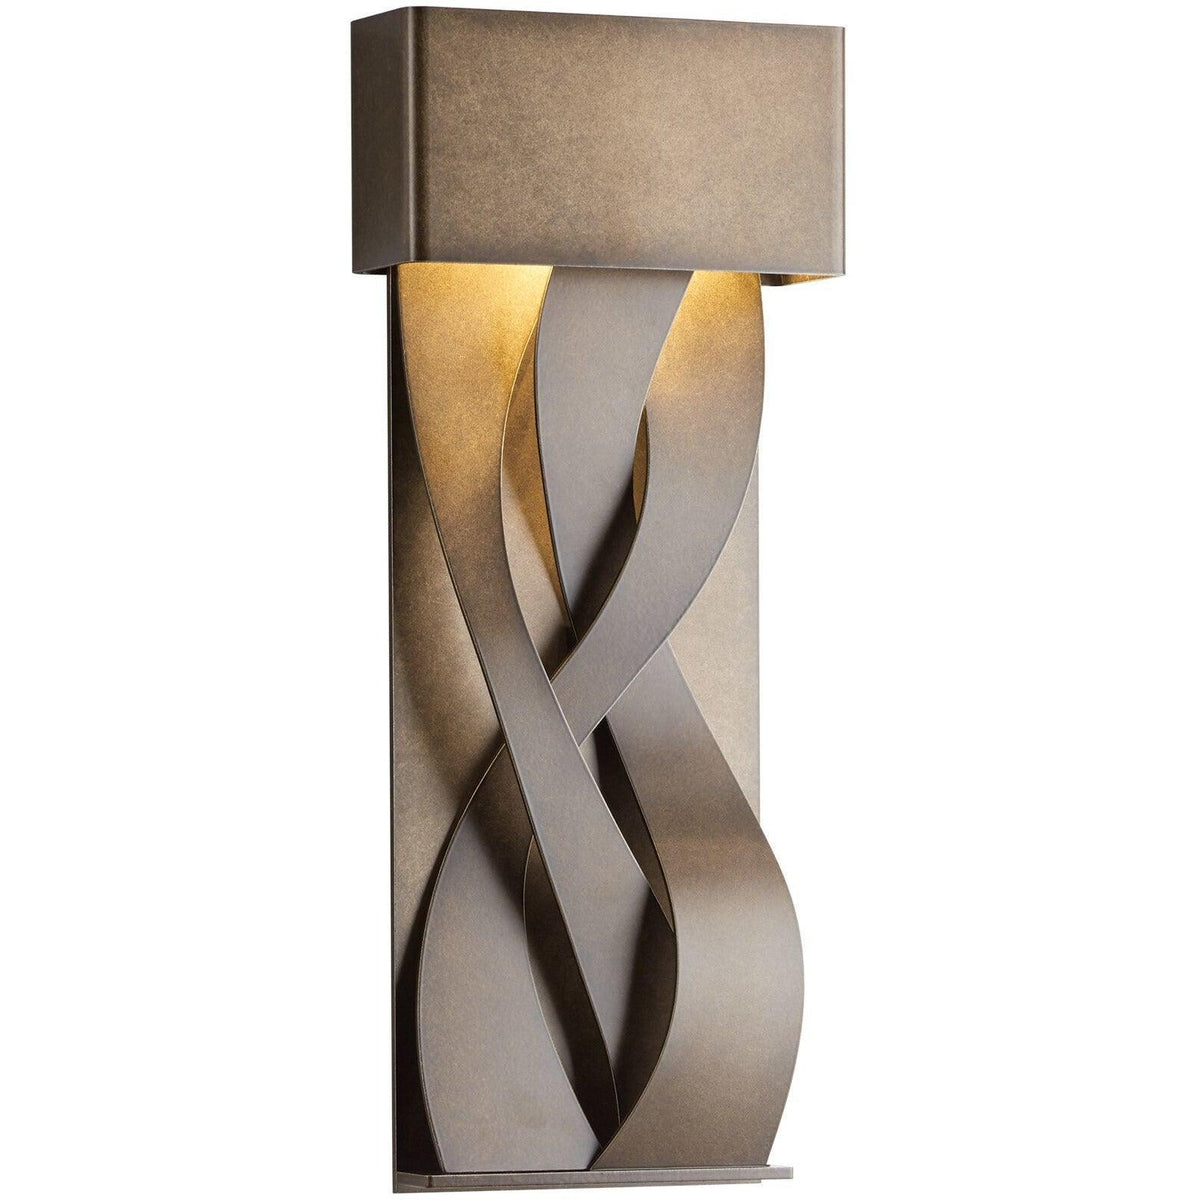 Hubbardton Forge - Tress 22-Inch LED Outdoor Wall Sconce - 302527-LED-75 | Montreal Lighting & Hardware